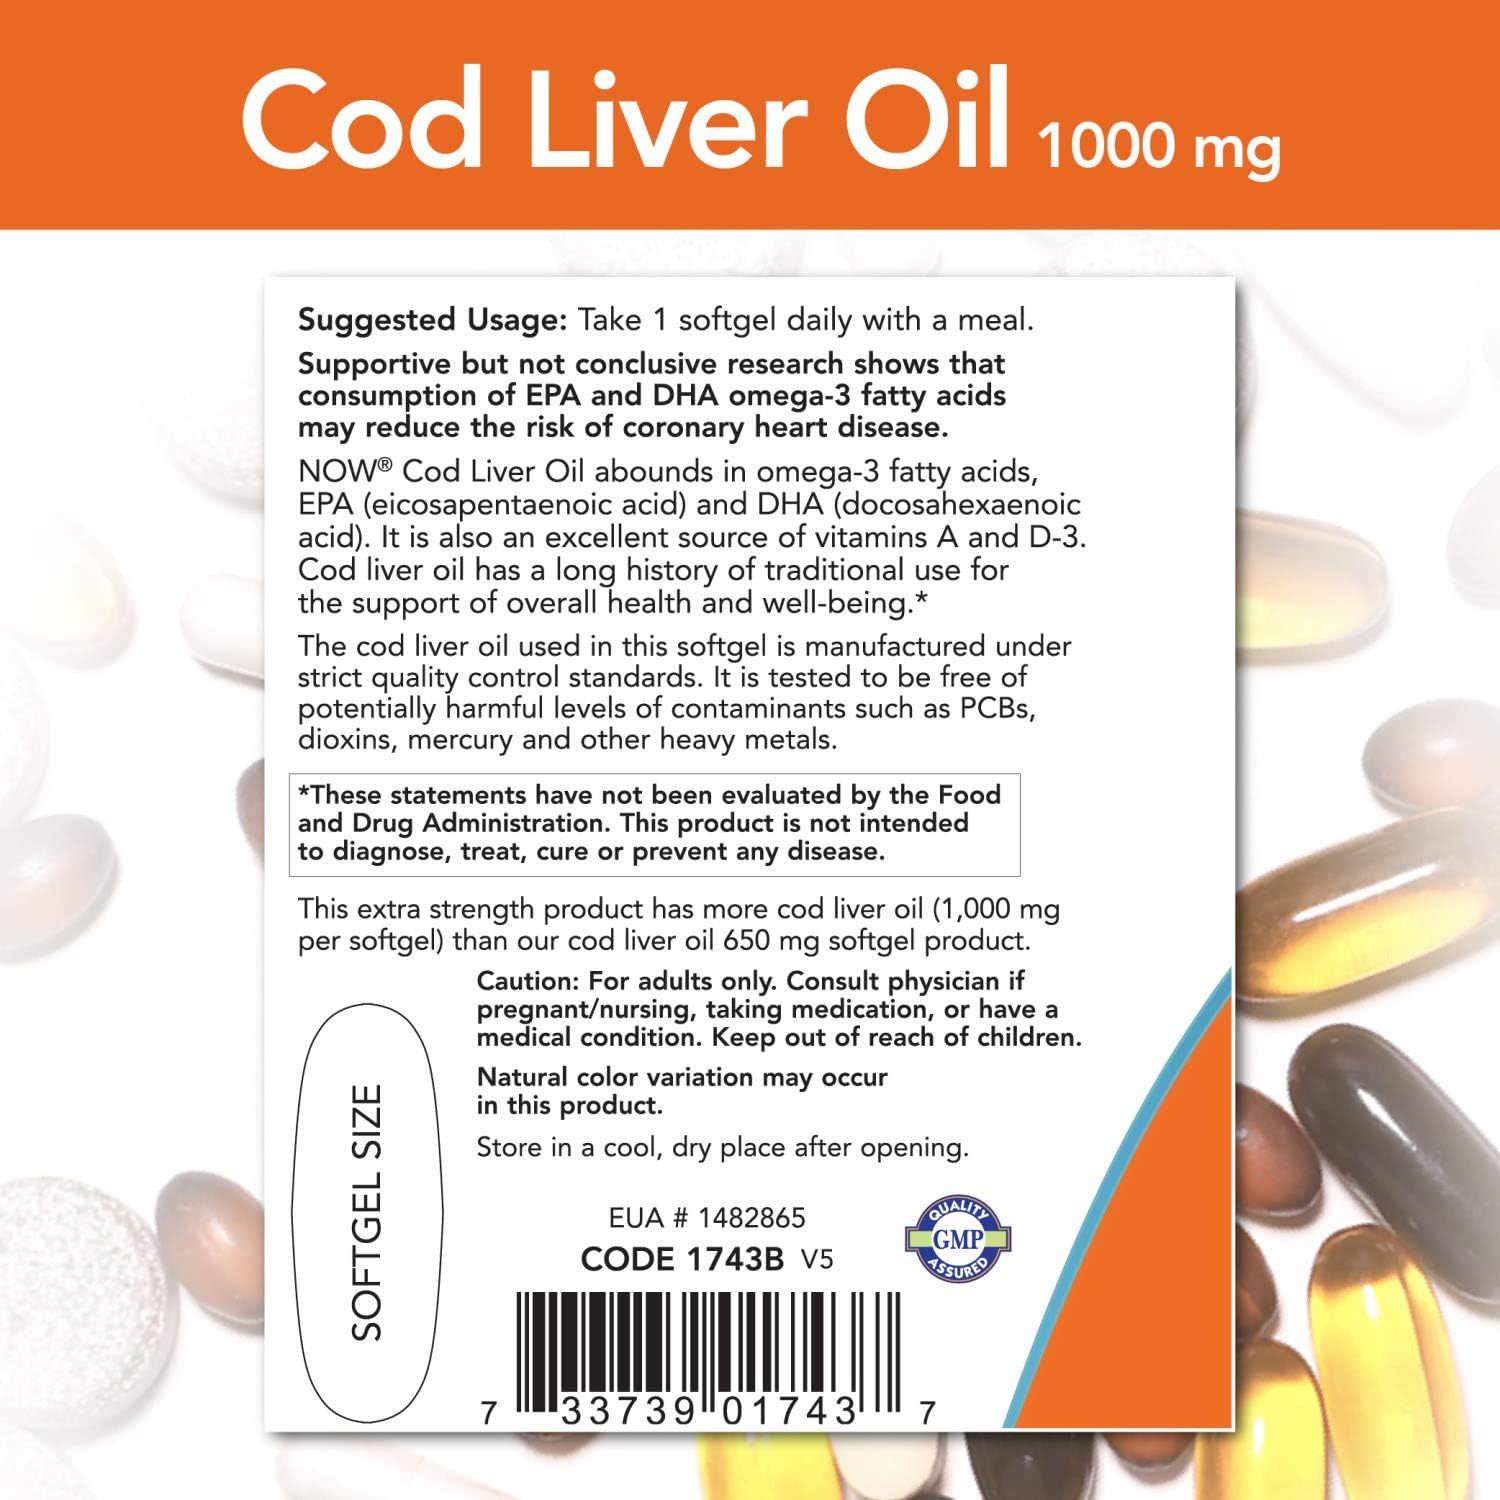  NOW Supplements, Cod Liver Oil, Extra Strength 1,000 mg with Vitamins A & D-3, EPA, DHA, 90 Softgels